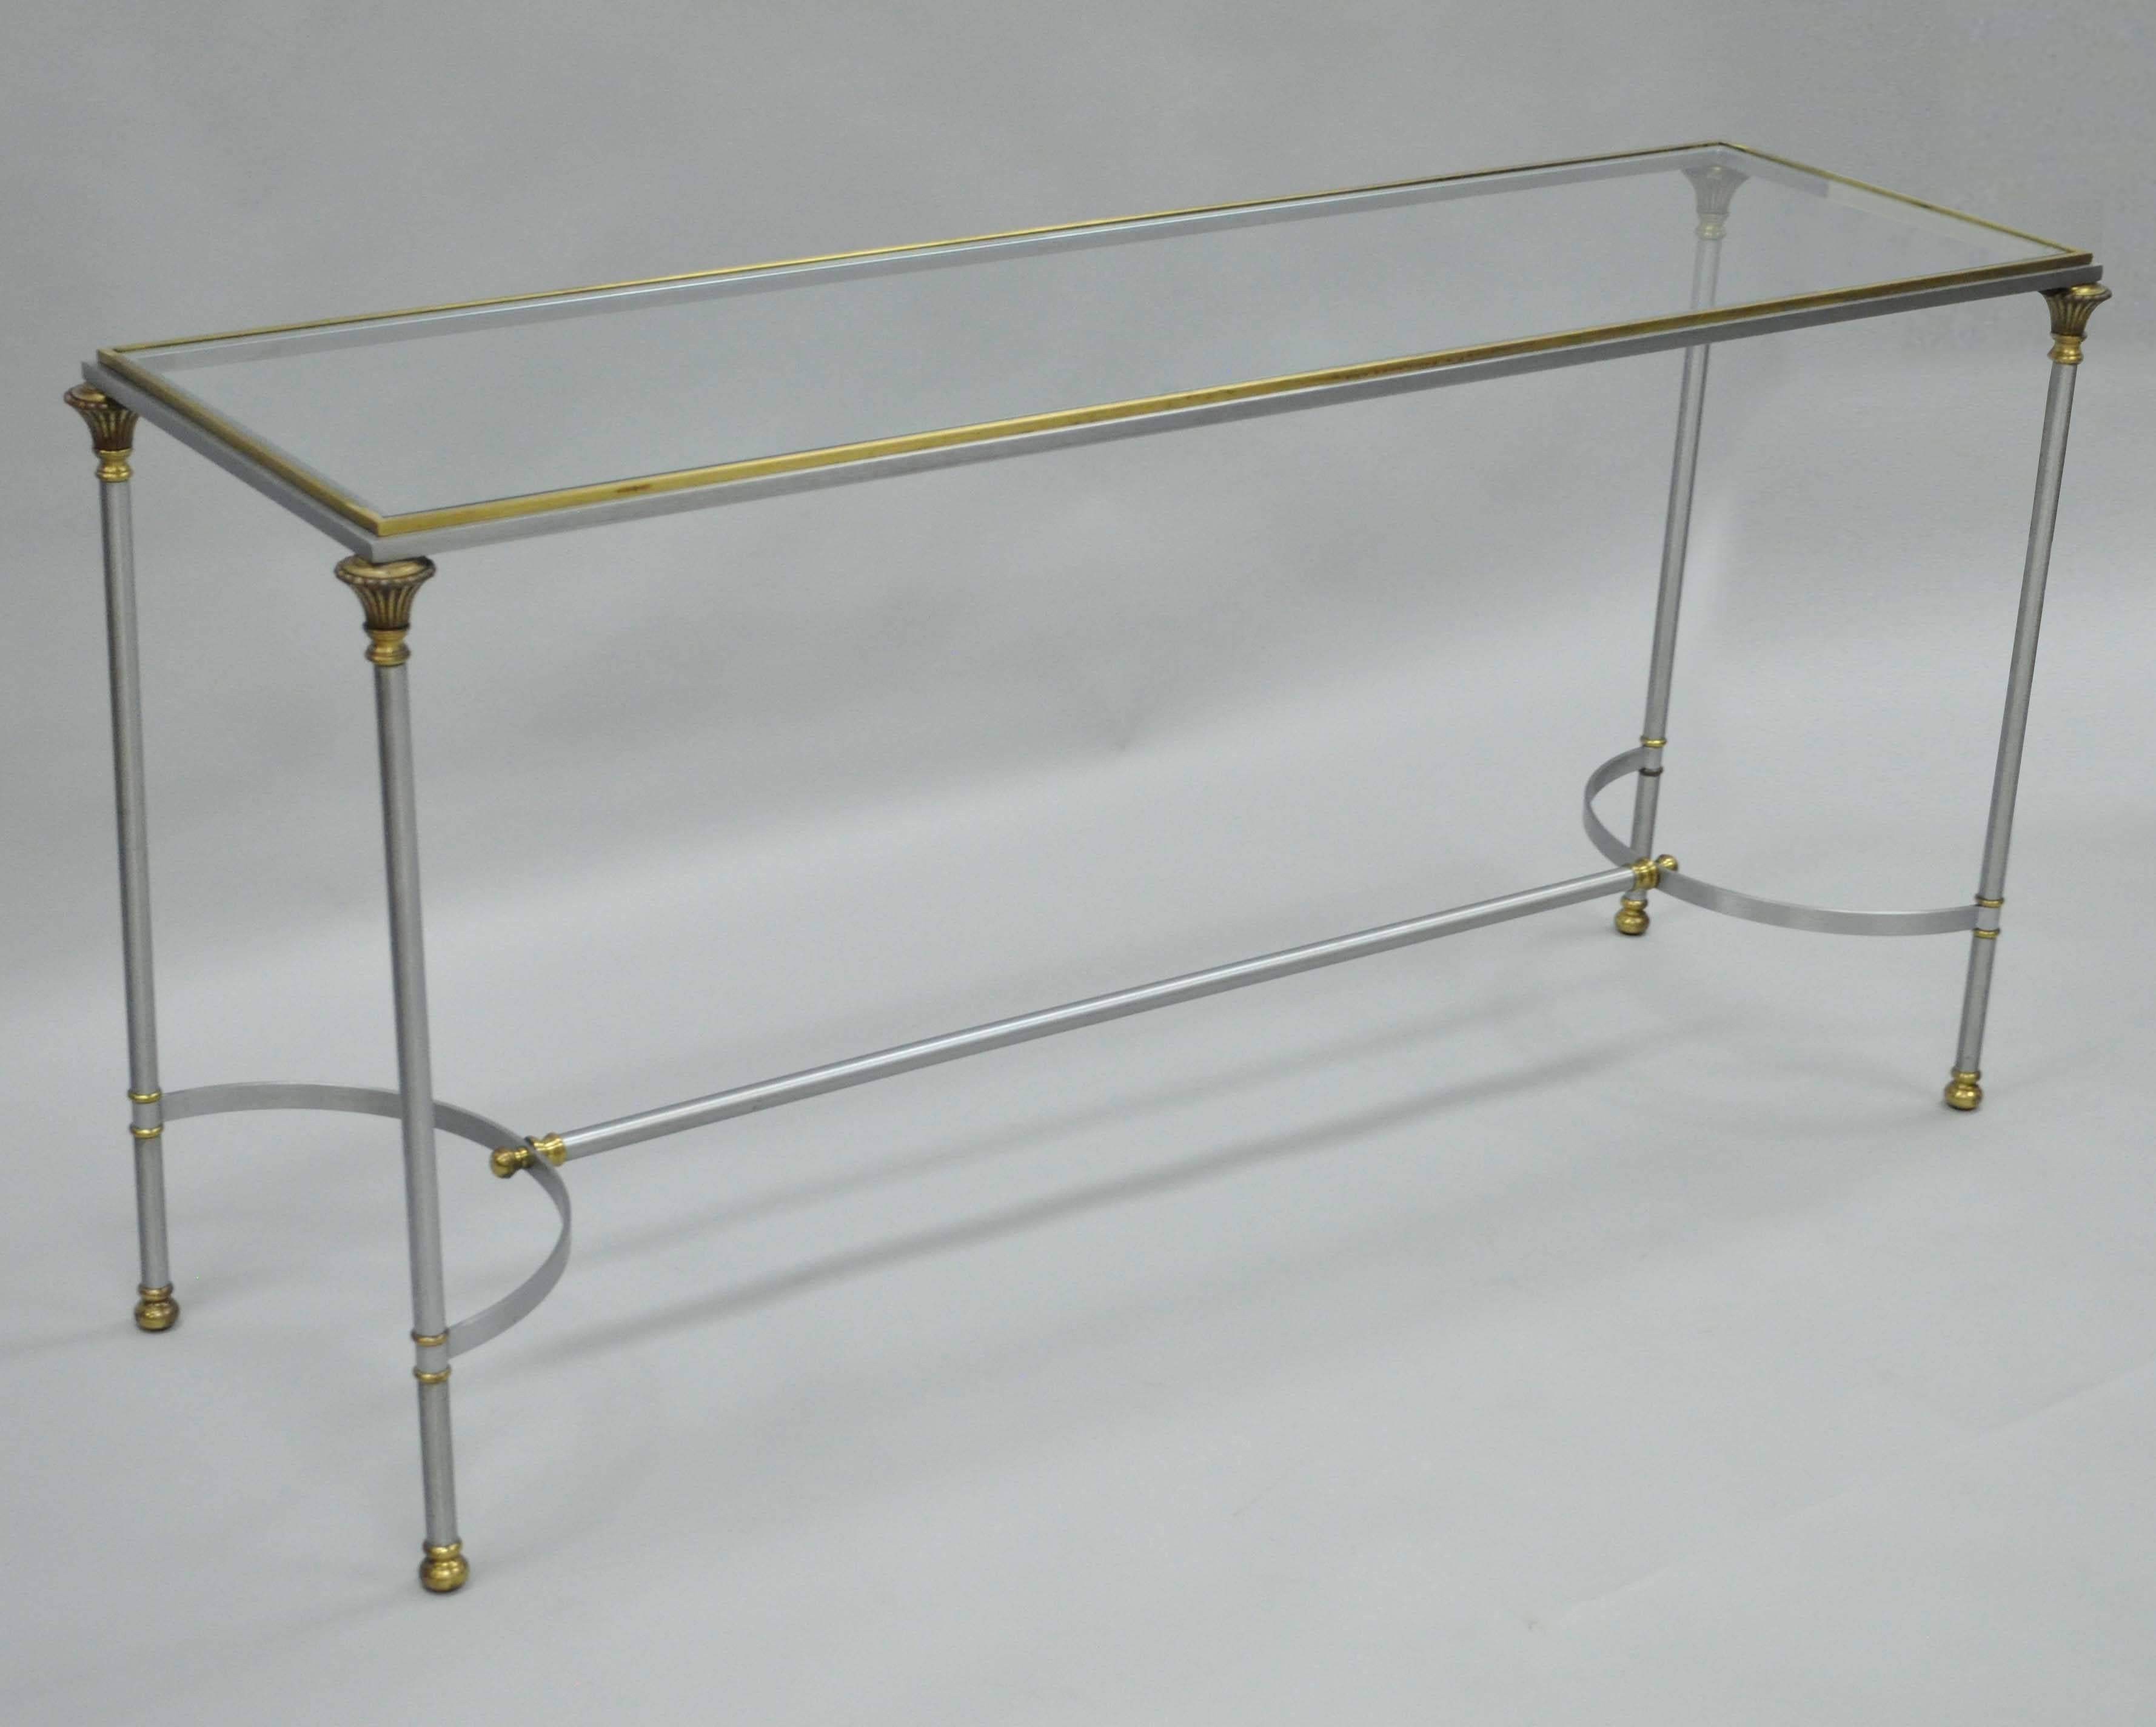 Elegant vintage Italian brushed steel and brass console table in the manner of Maison Jansen. Item features a rectangular form with solid brass gallery, inset glass top, brushed steel stretcher supported frame, brass accents and quintessential